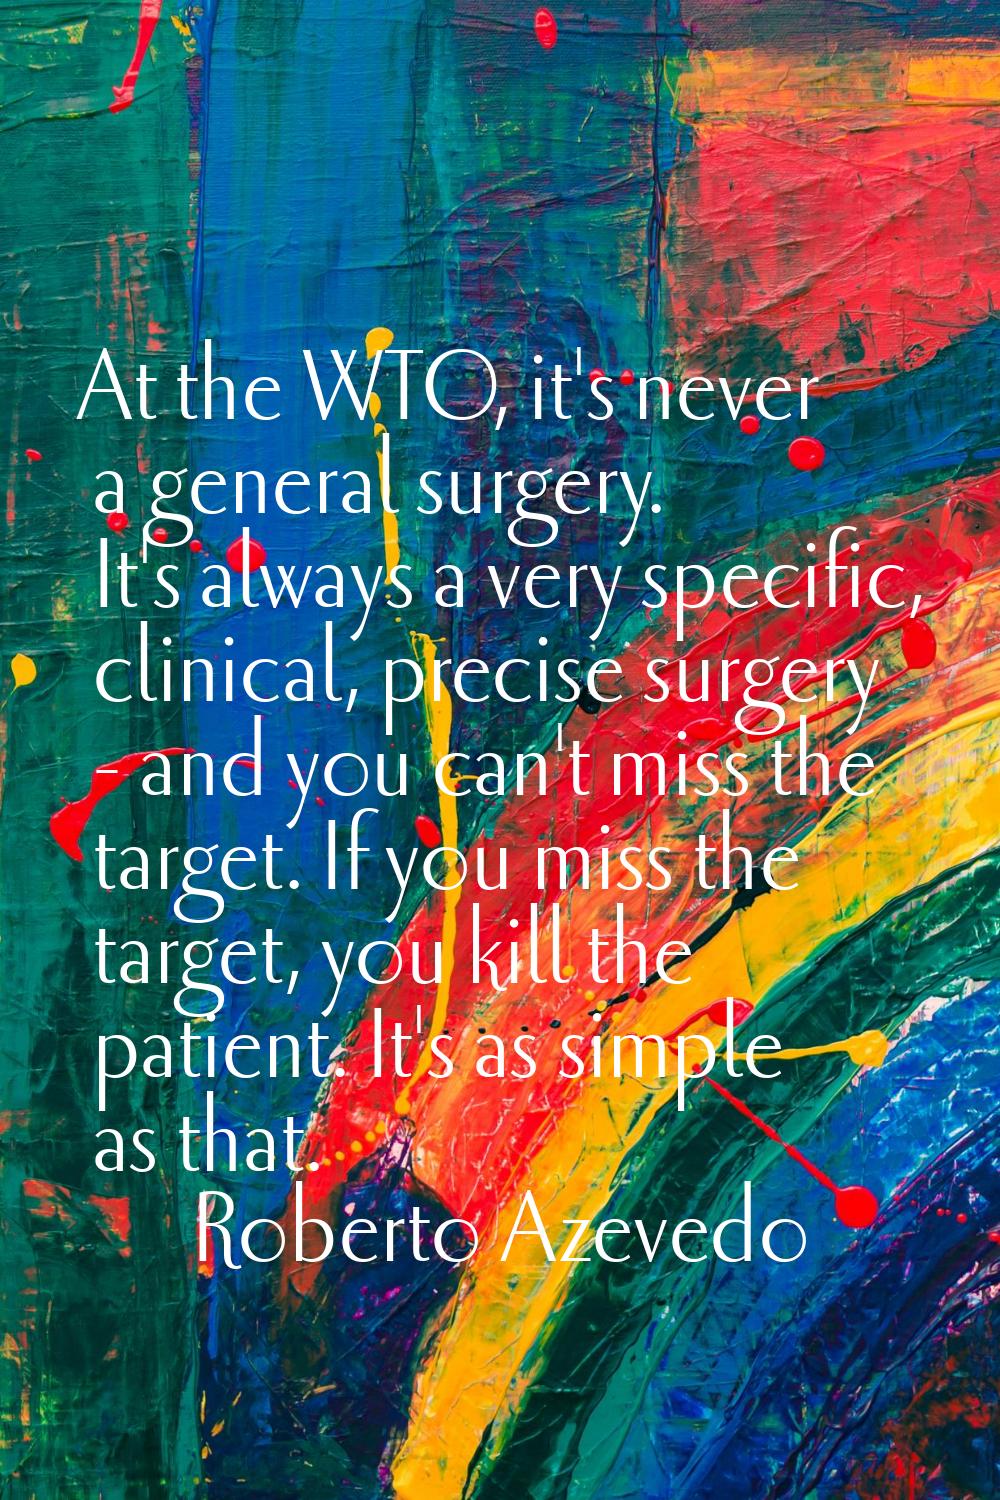 At the WTO, it's never a general surgery. It's always a very specific, clinical, precise surgery - 